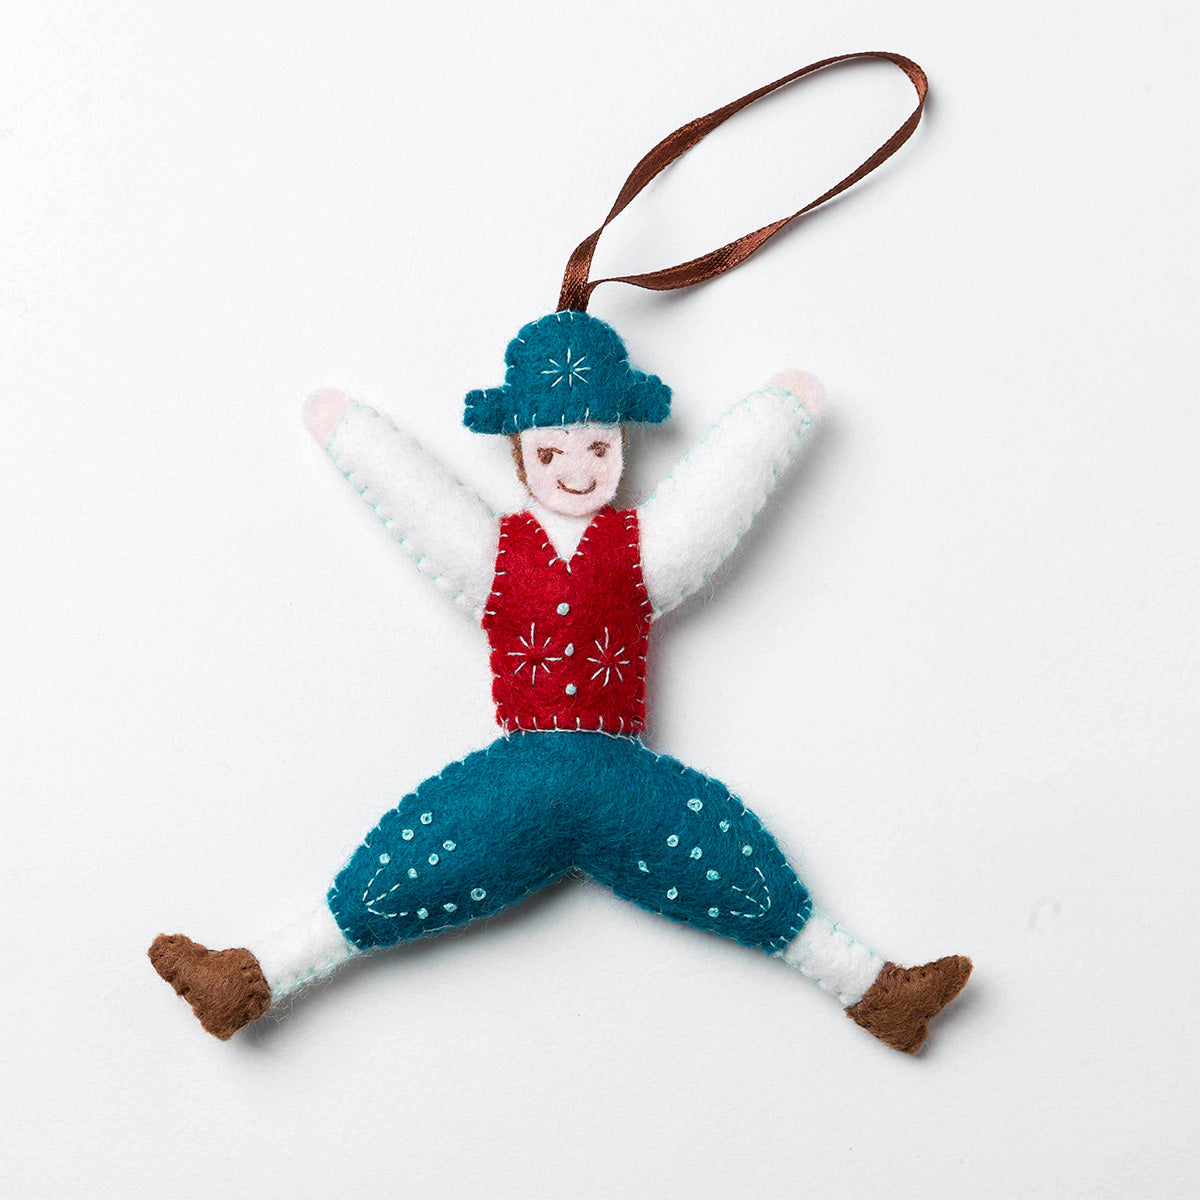 12 Days of Christmas Felt Ornament Kit - Lord-a-Leaping - Stitched Modern